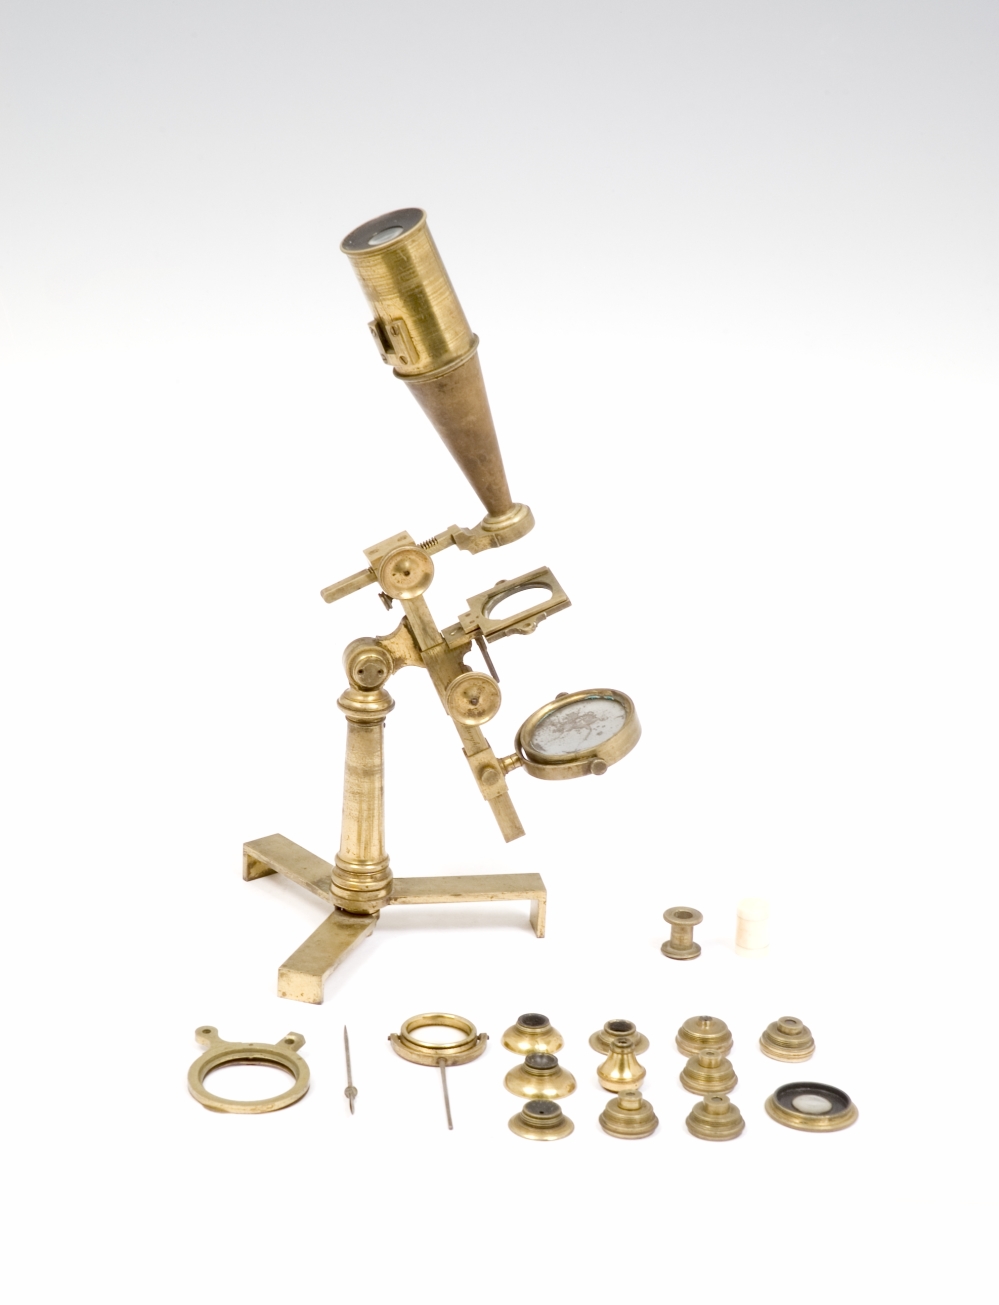 preview image for Compound Microscope with Accessories and Case, by Dunn, Scotland, c. 1830